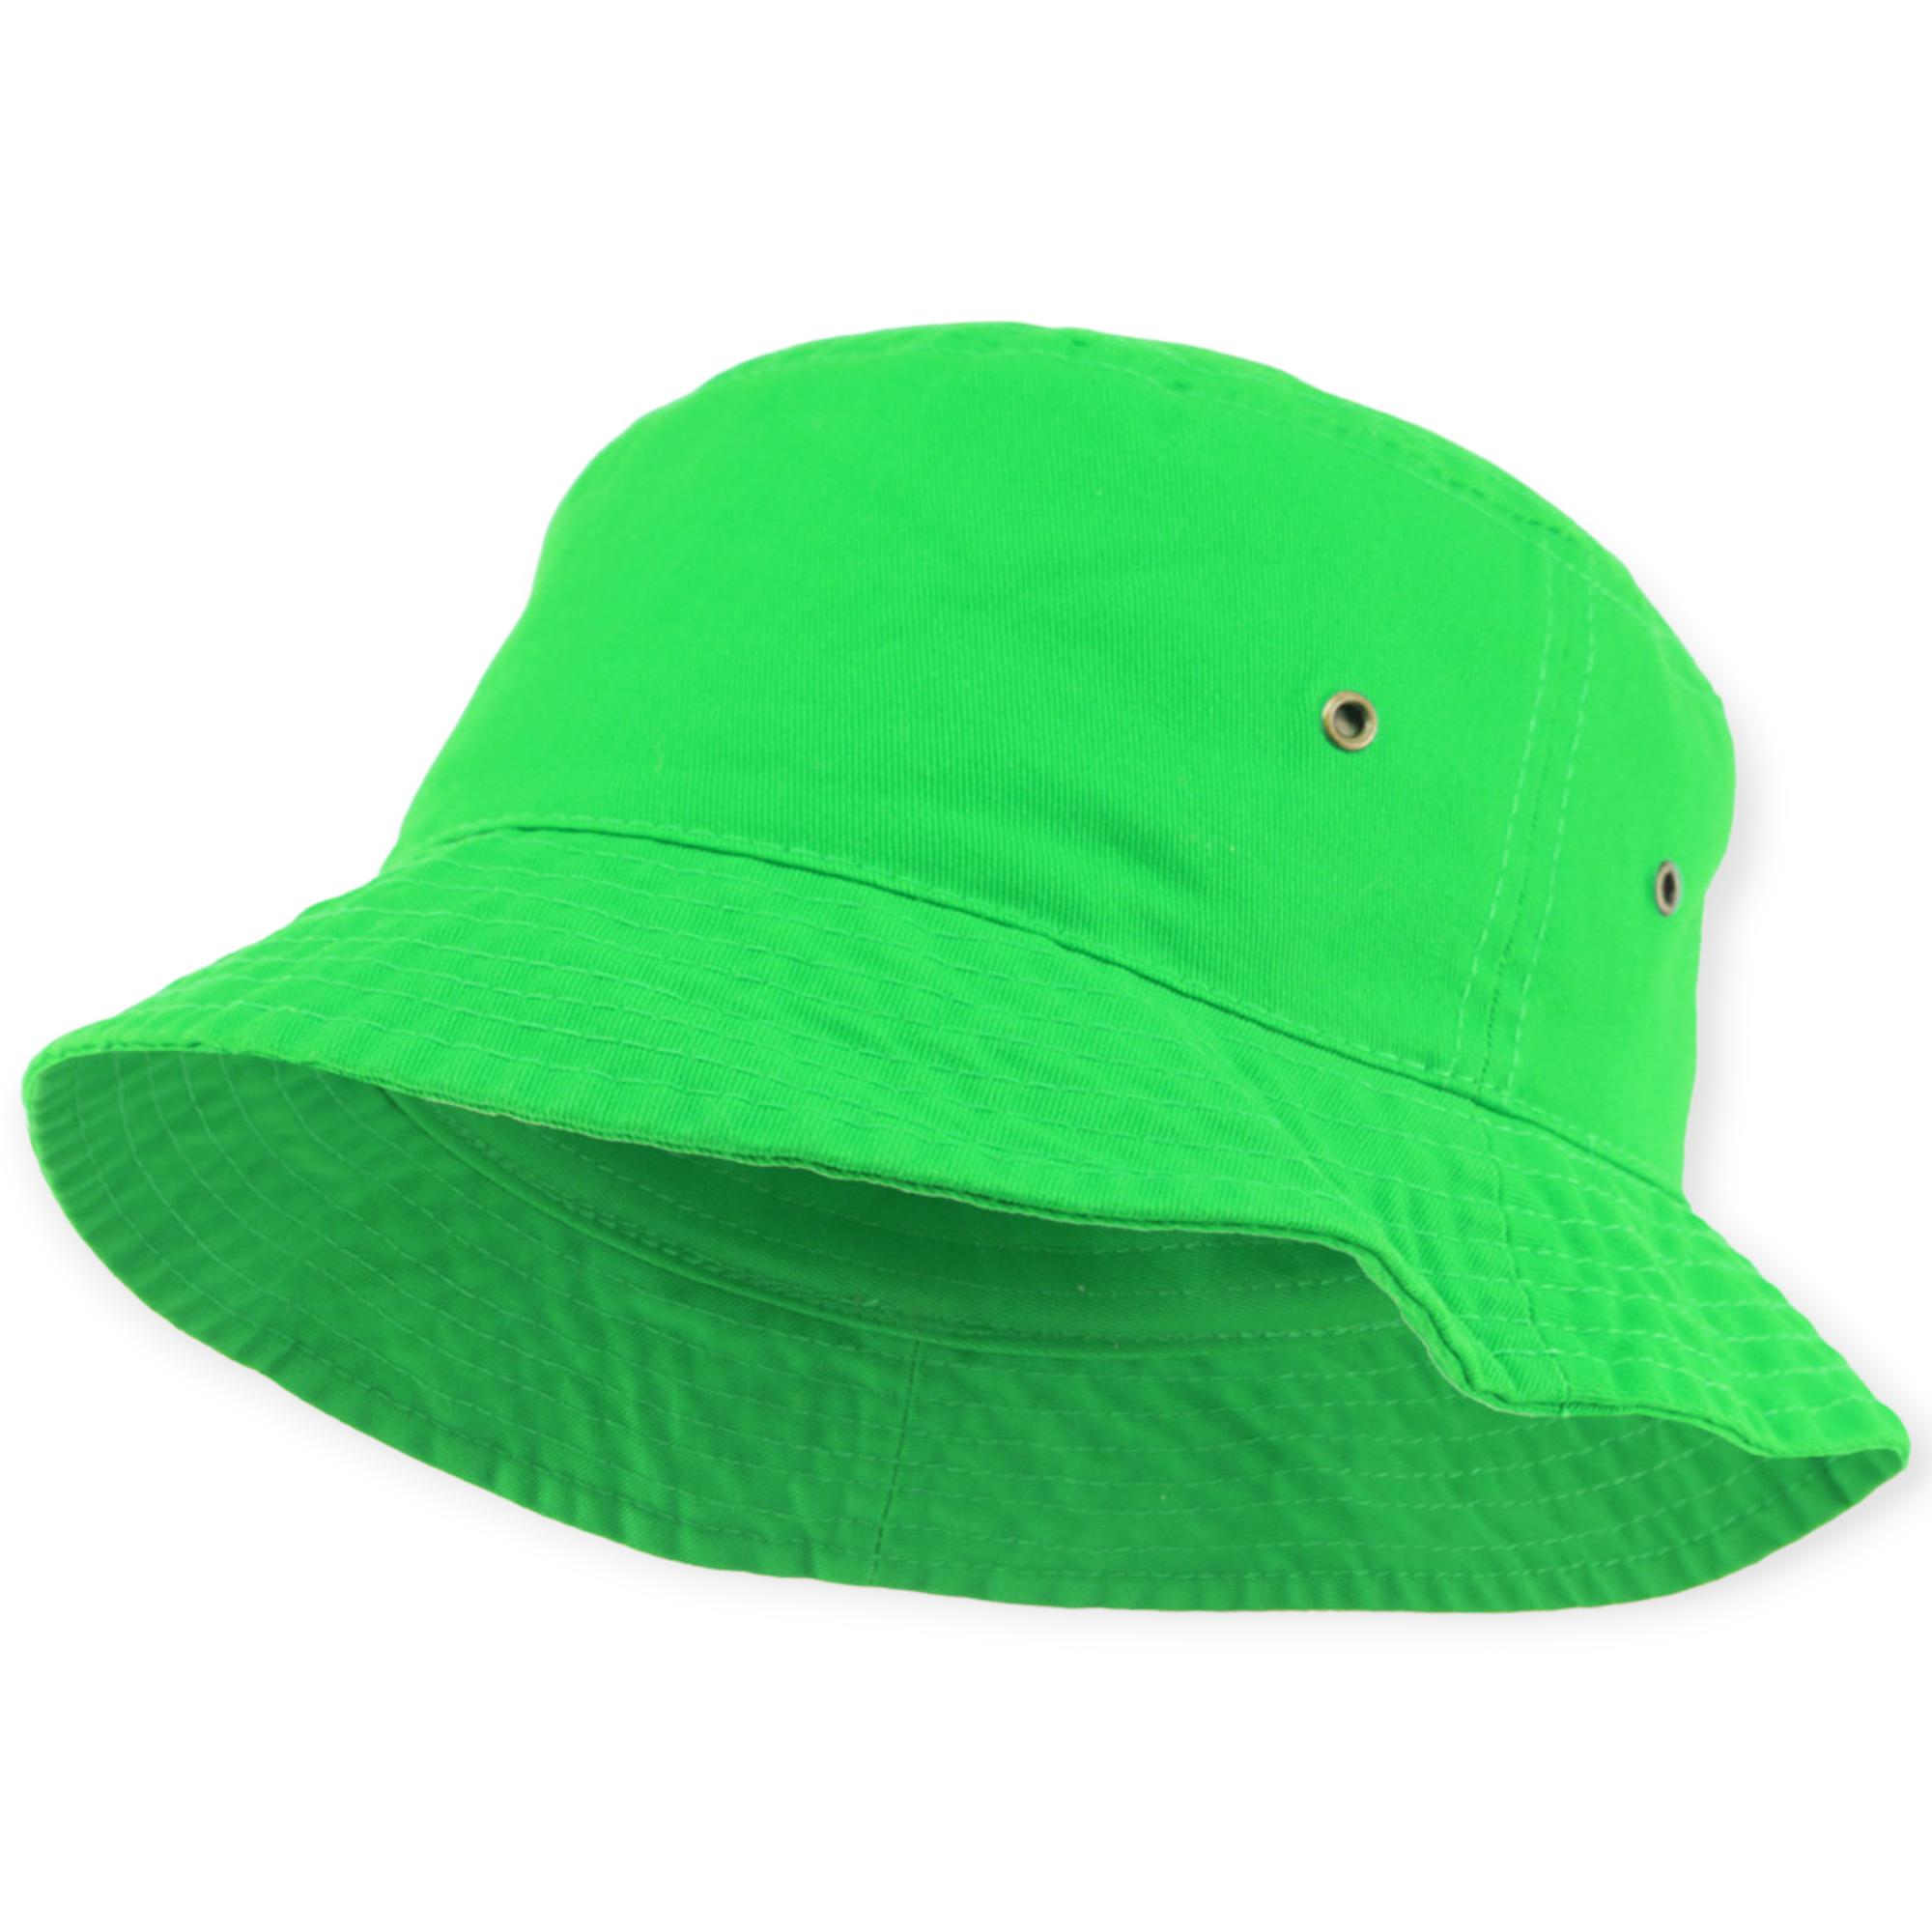 KB Ethos Solid Bucket Hat Fitted (Neon Green)